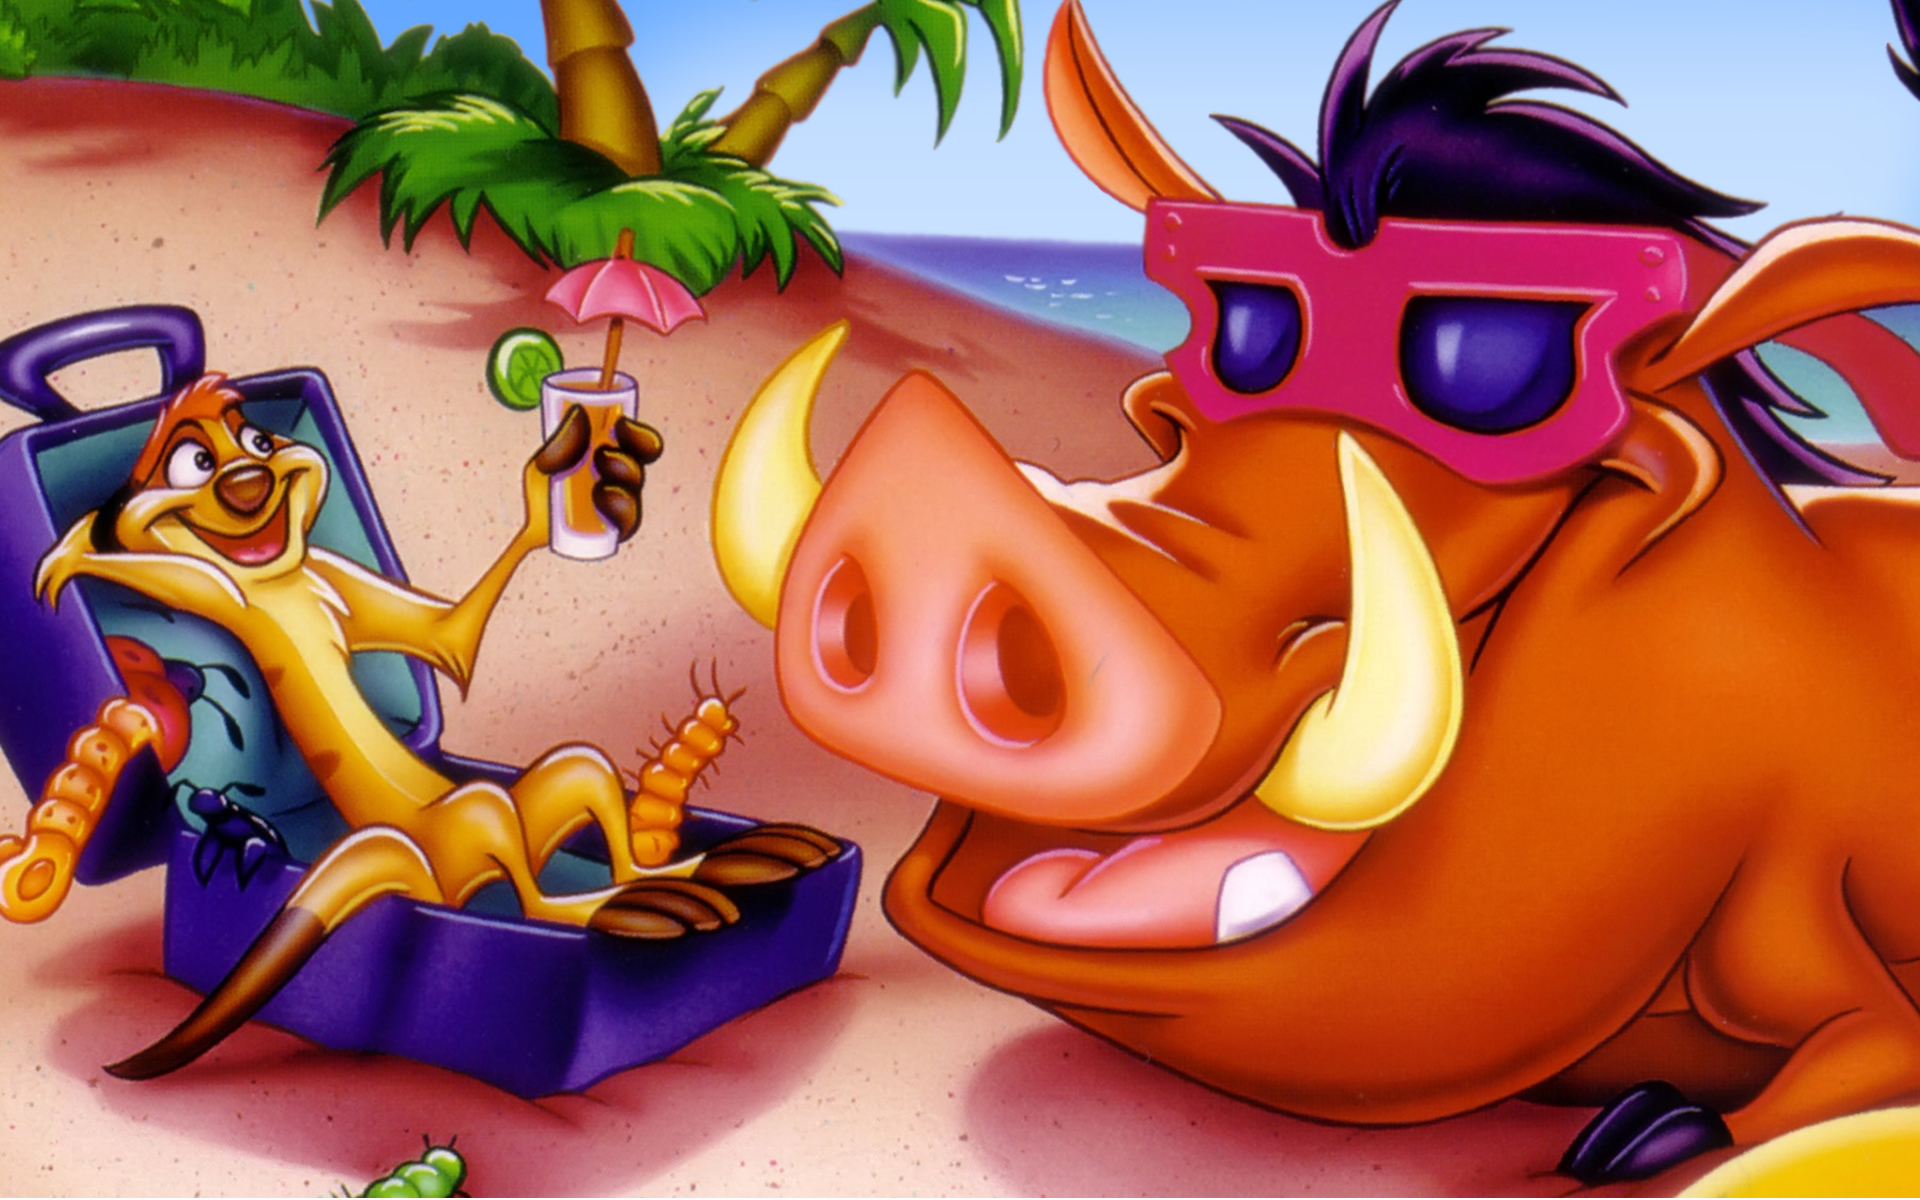 Timon And Pumbaa Party - 1920x1200 Wallpaper 